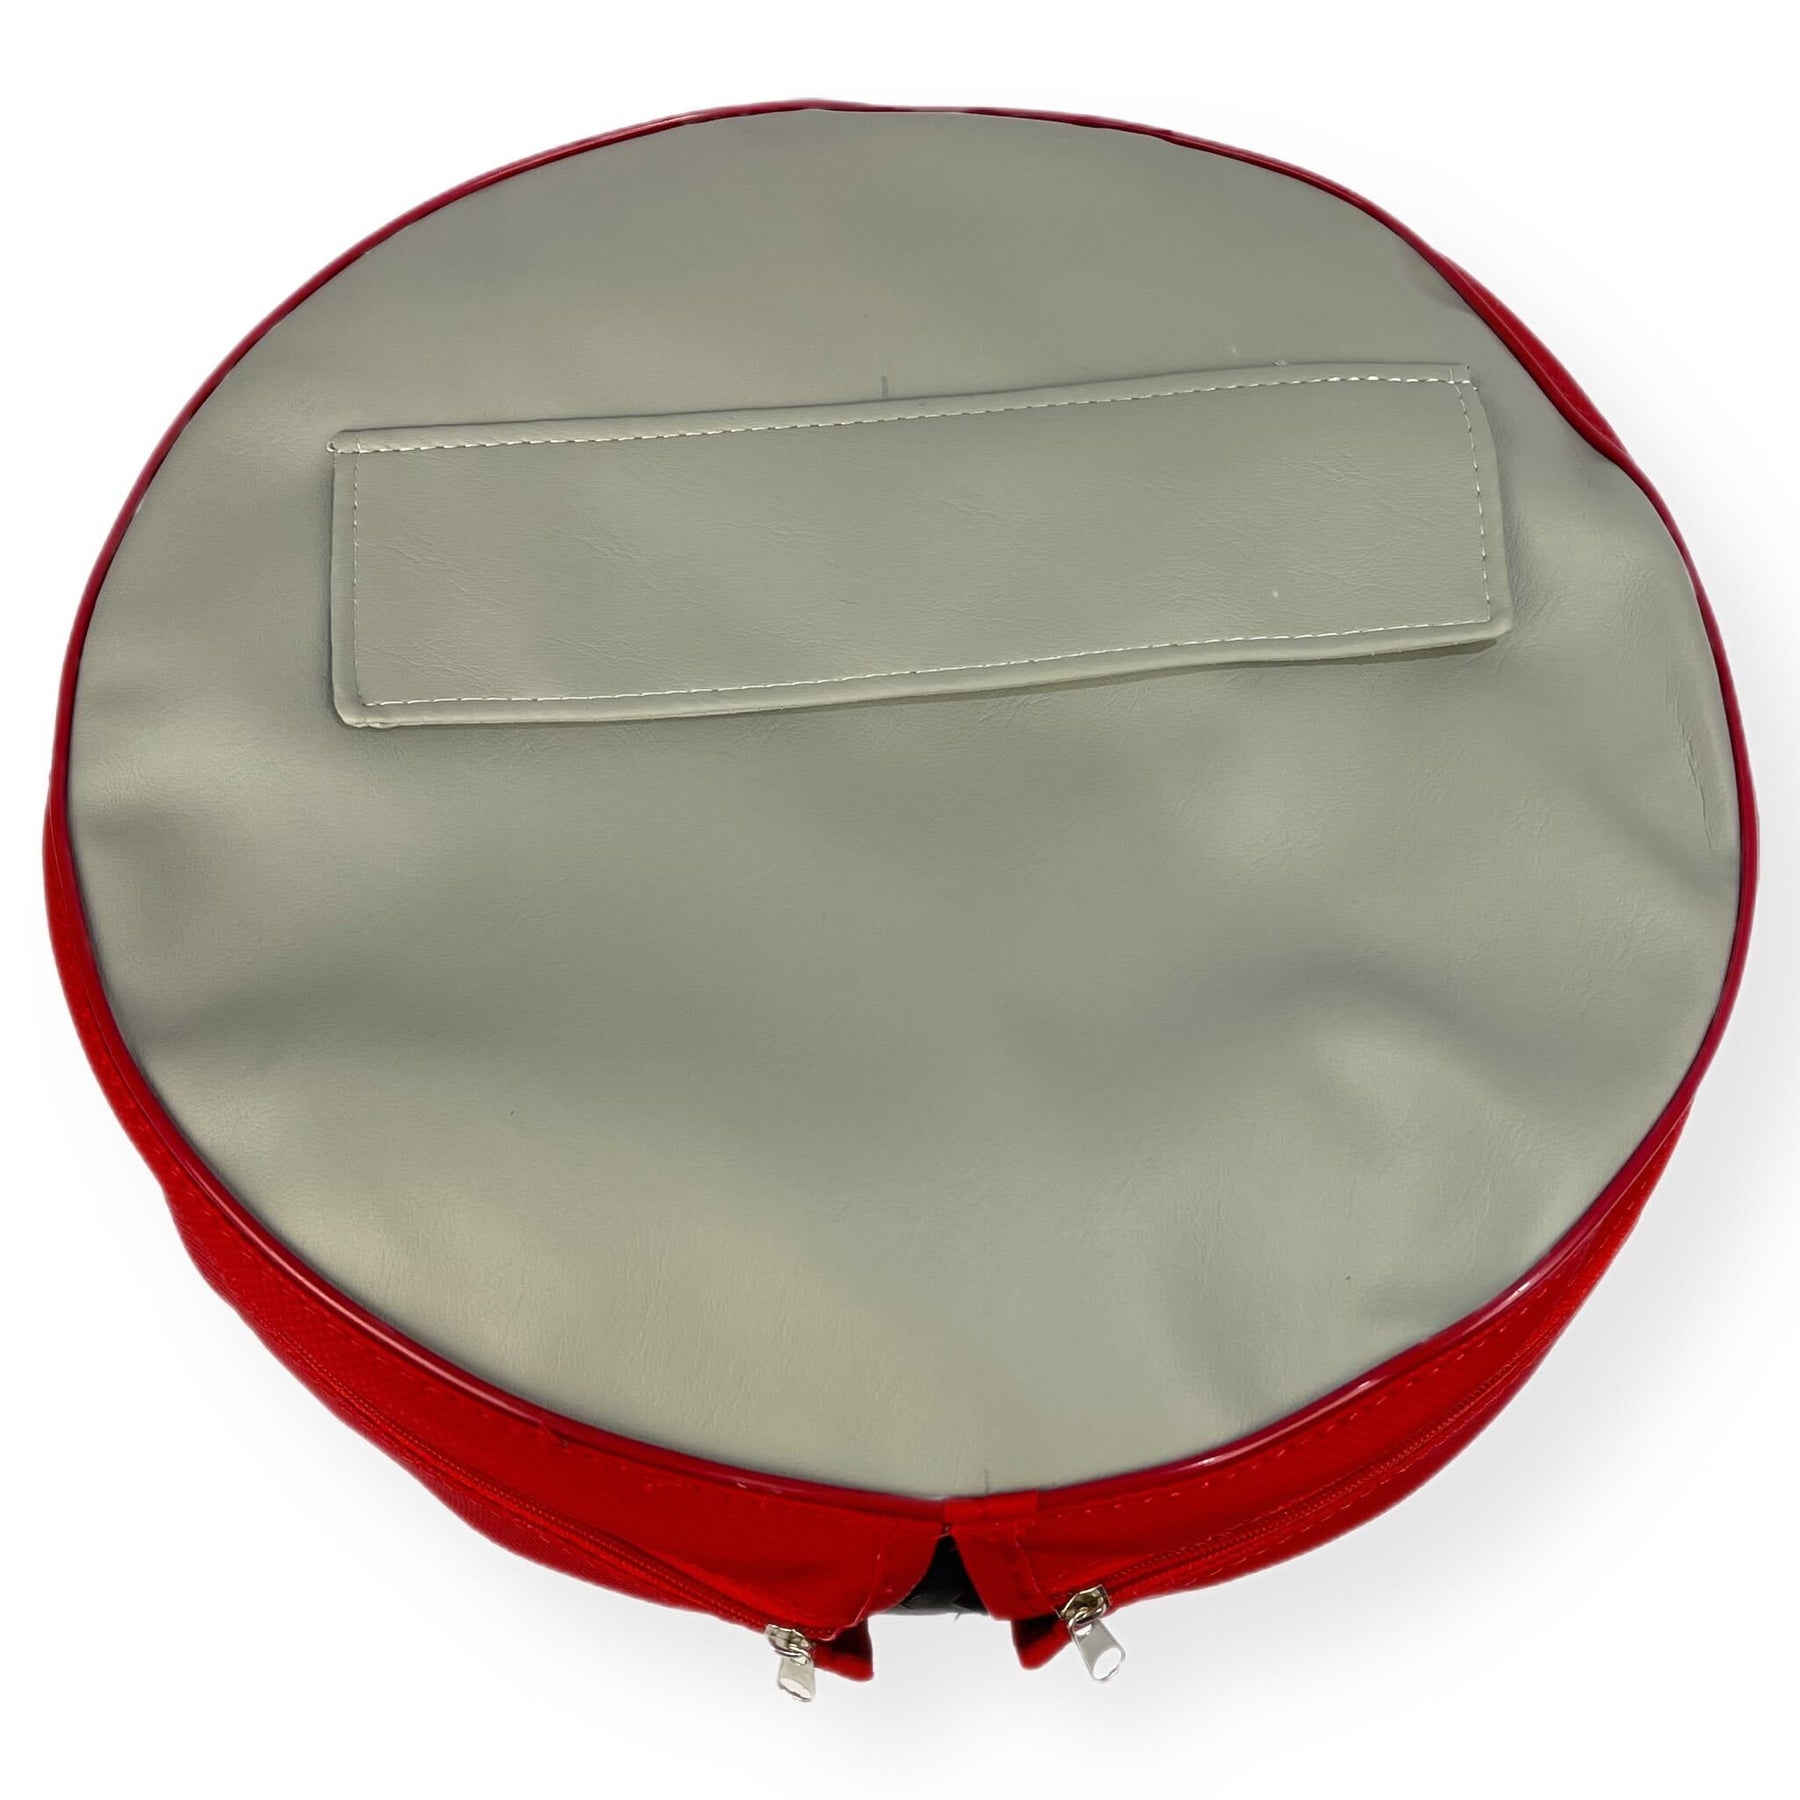 Wheel - Spare Wheel Cover 8" - With Pocket - Made To Order